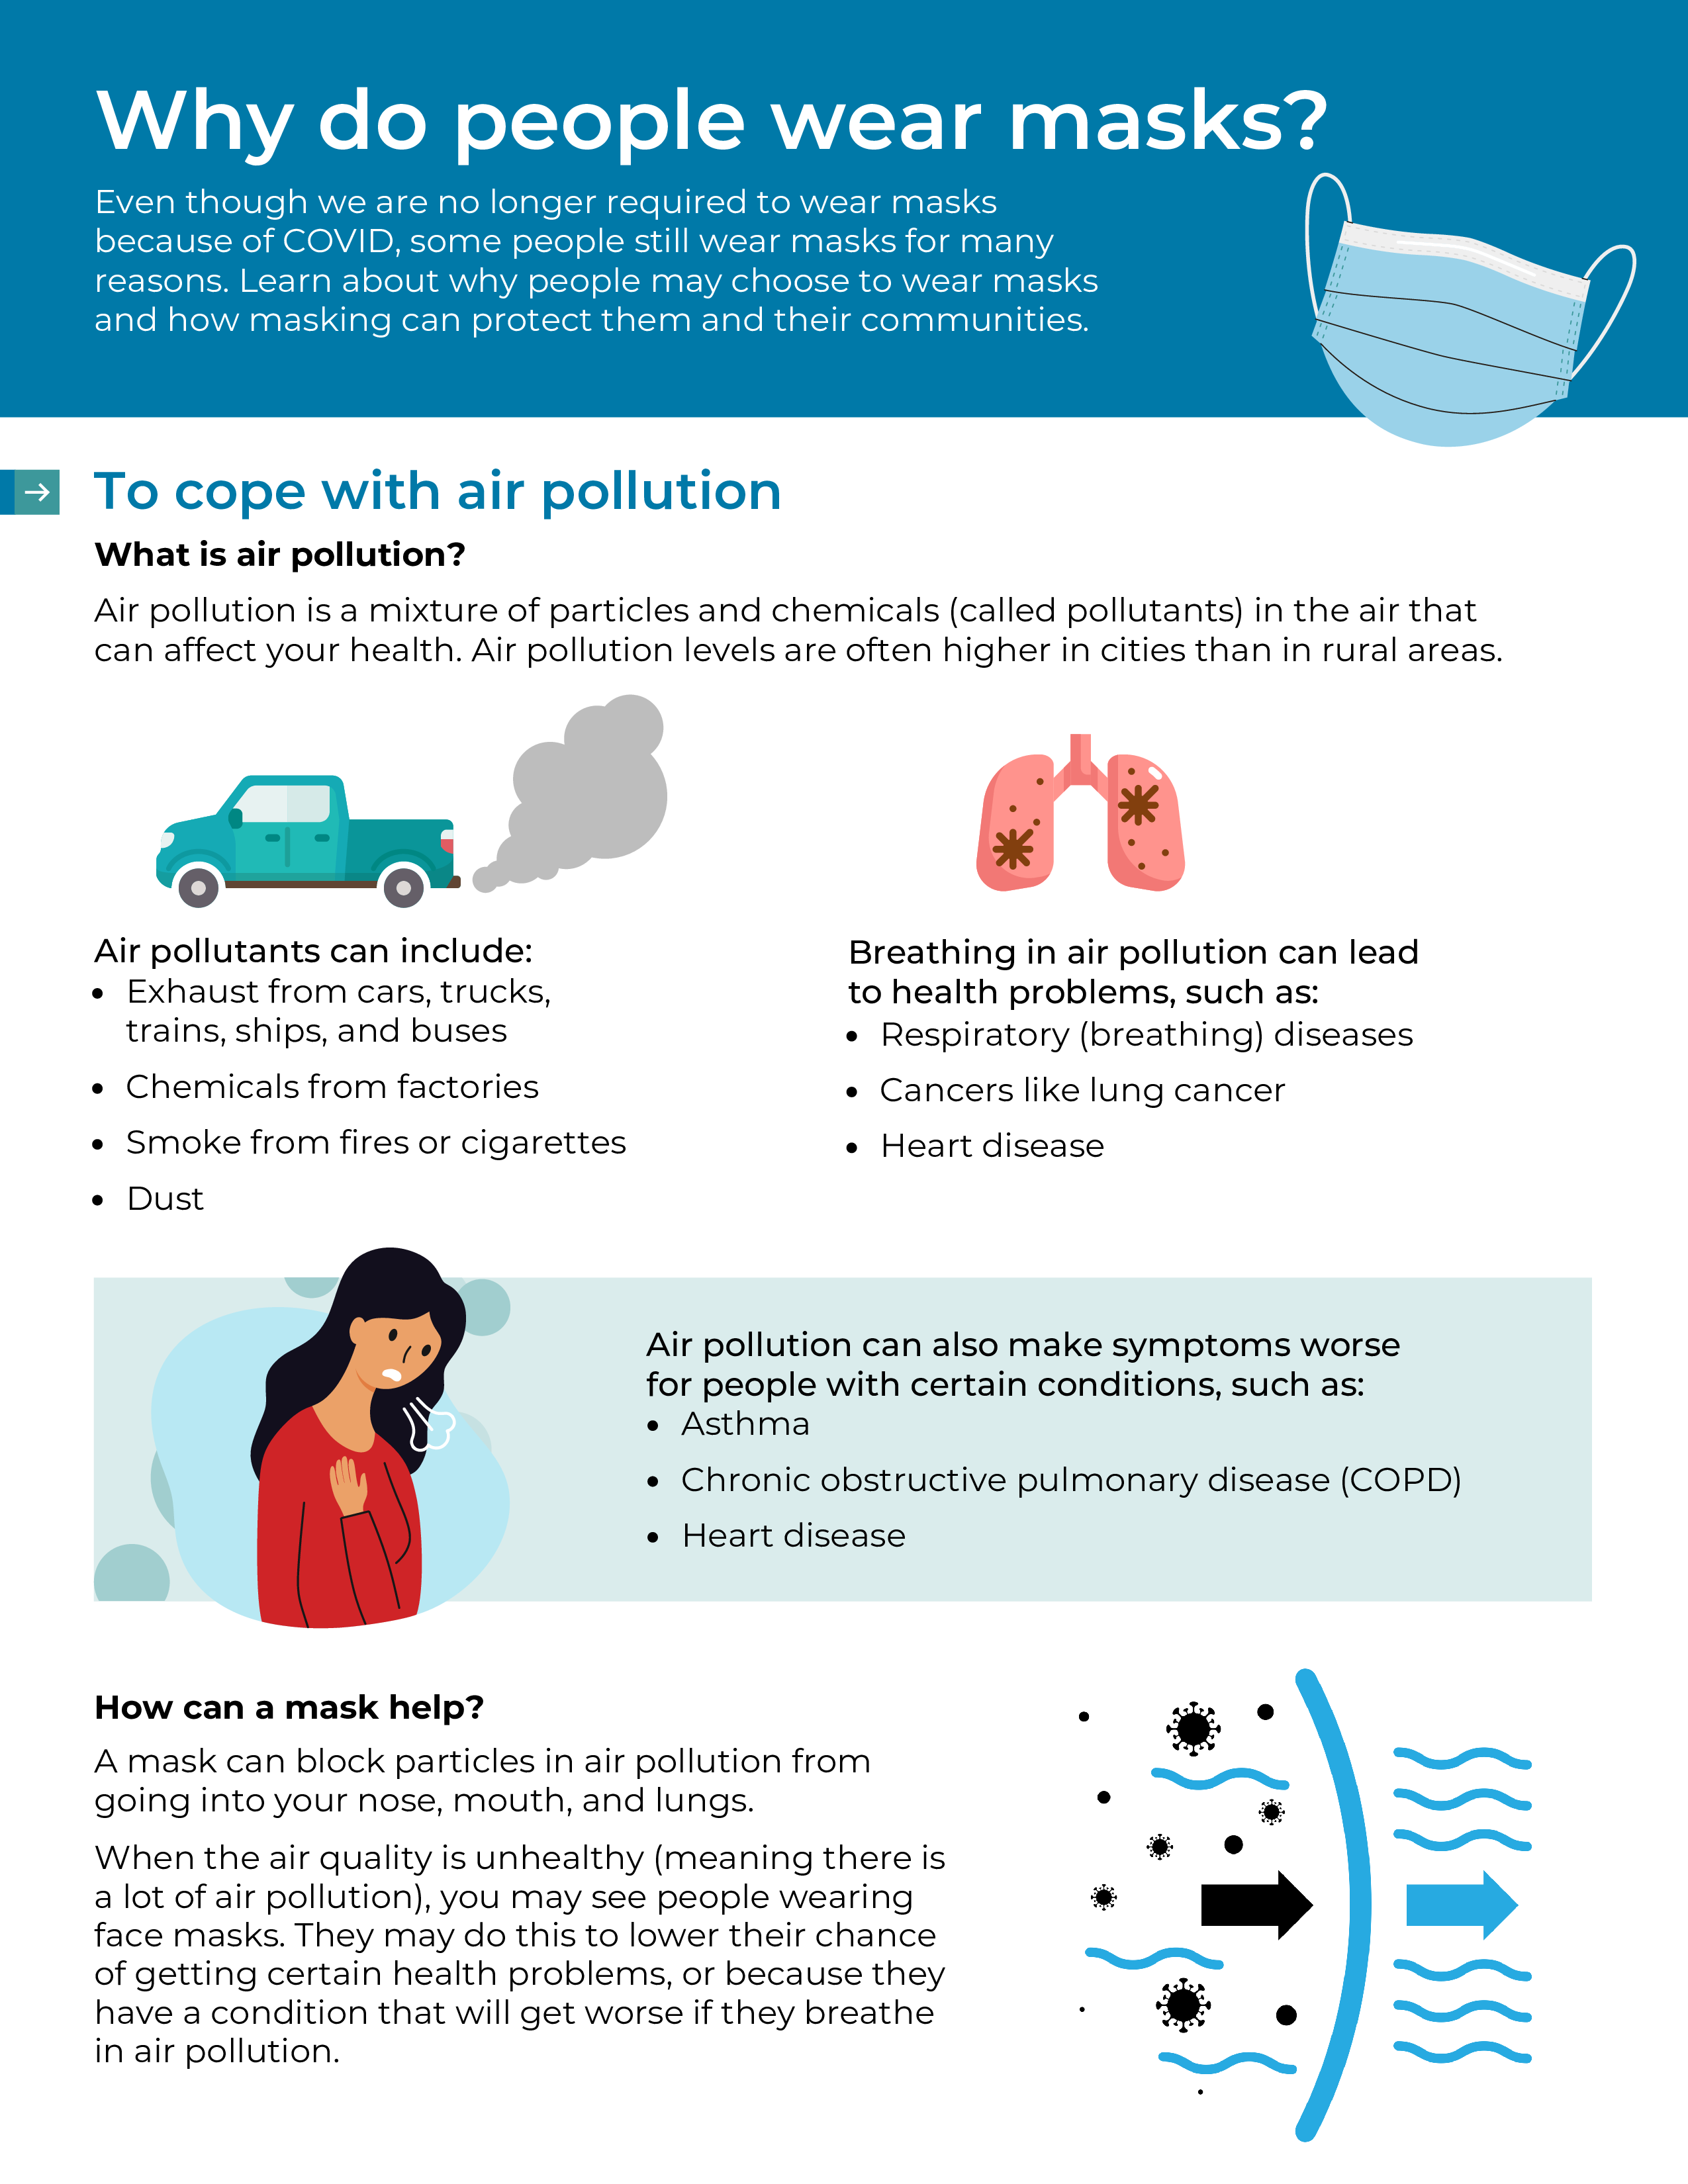 Factsheet displays cartoon images of a truck emitting exhaust, diseased lunges and a woman coughing alongside text explaining how masks can help you cope with air pollution.